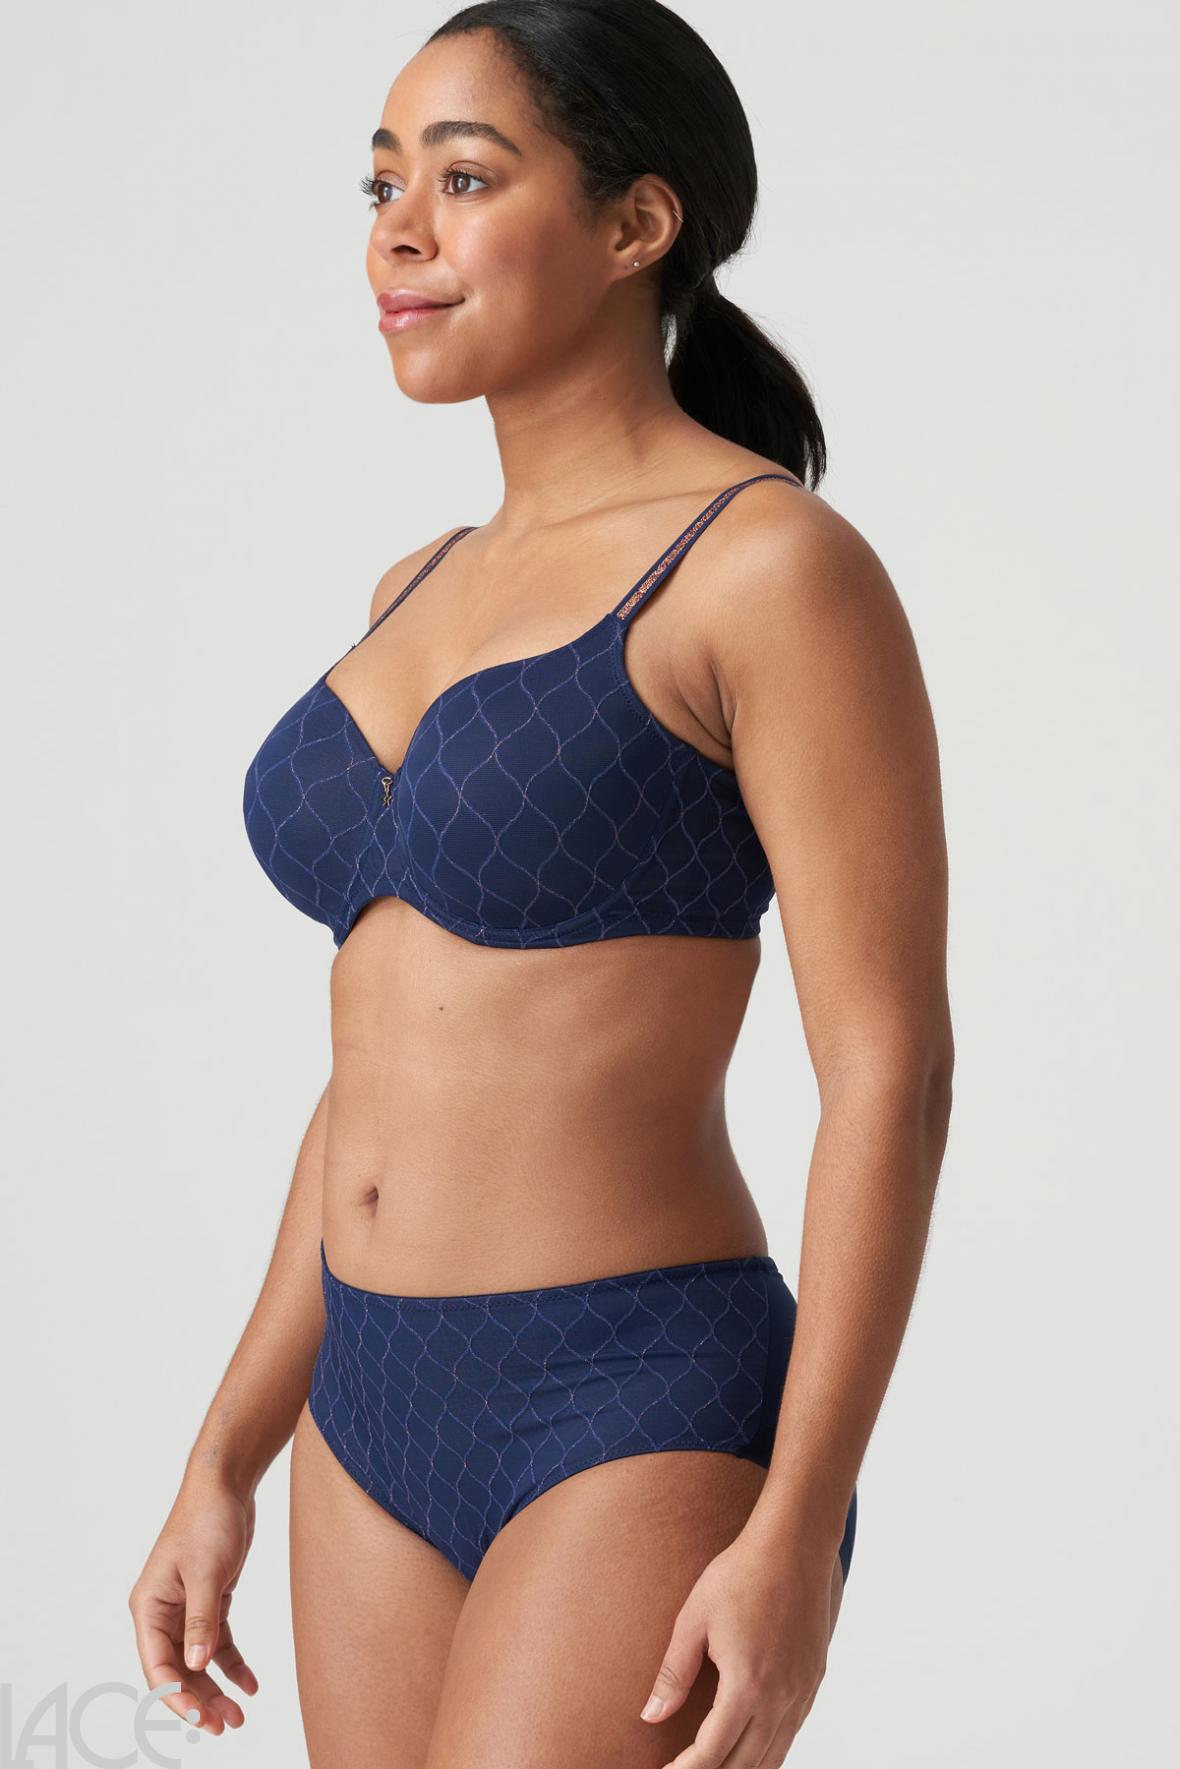 Cacique Lightly Lined Full Coverage Bra Underwire Navy Blue Stripe Size 44H